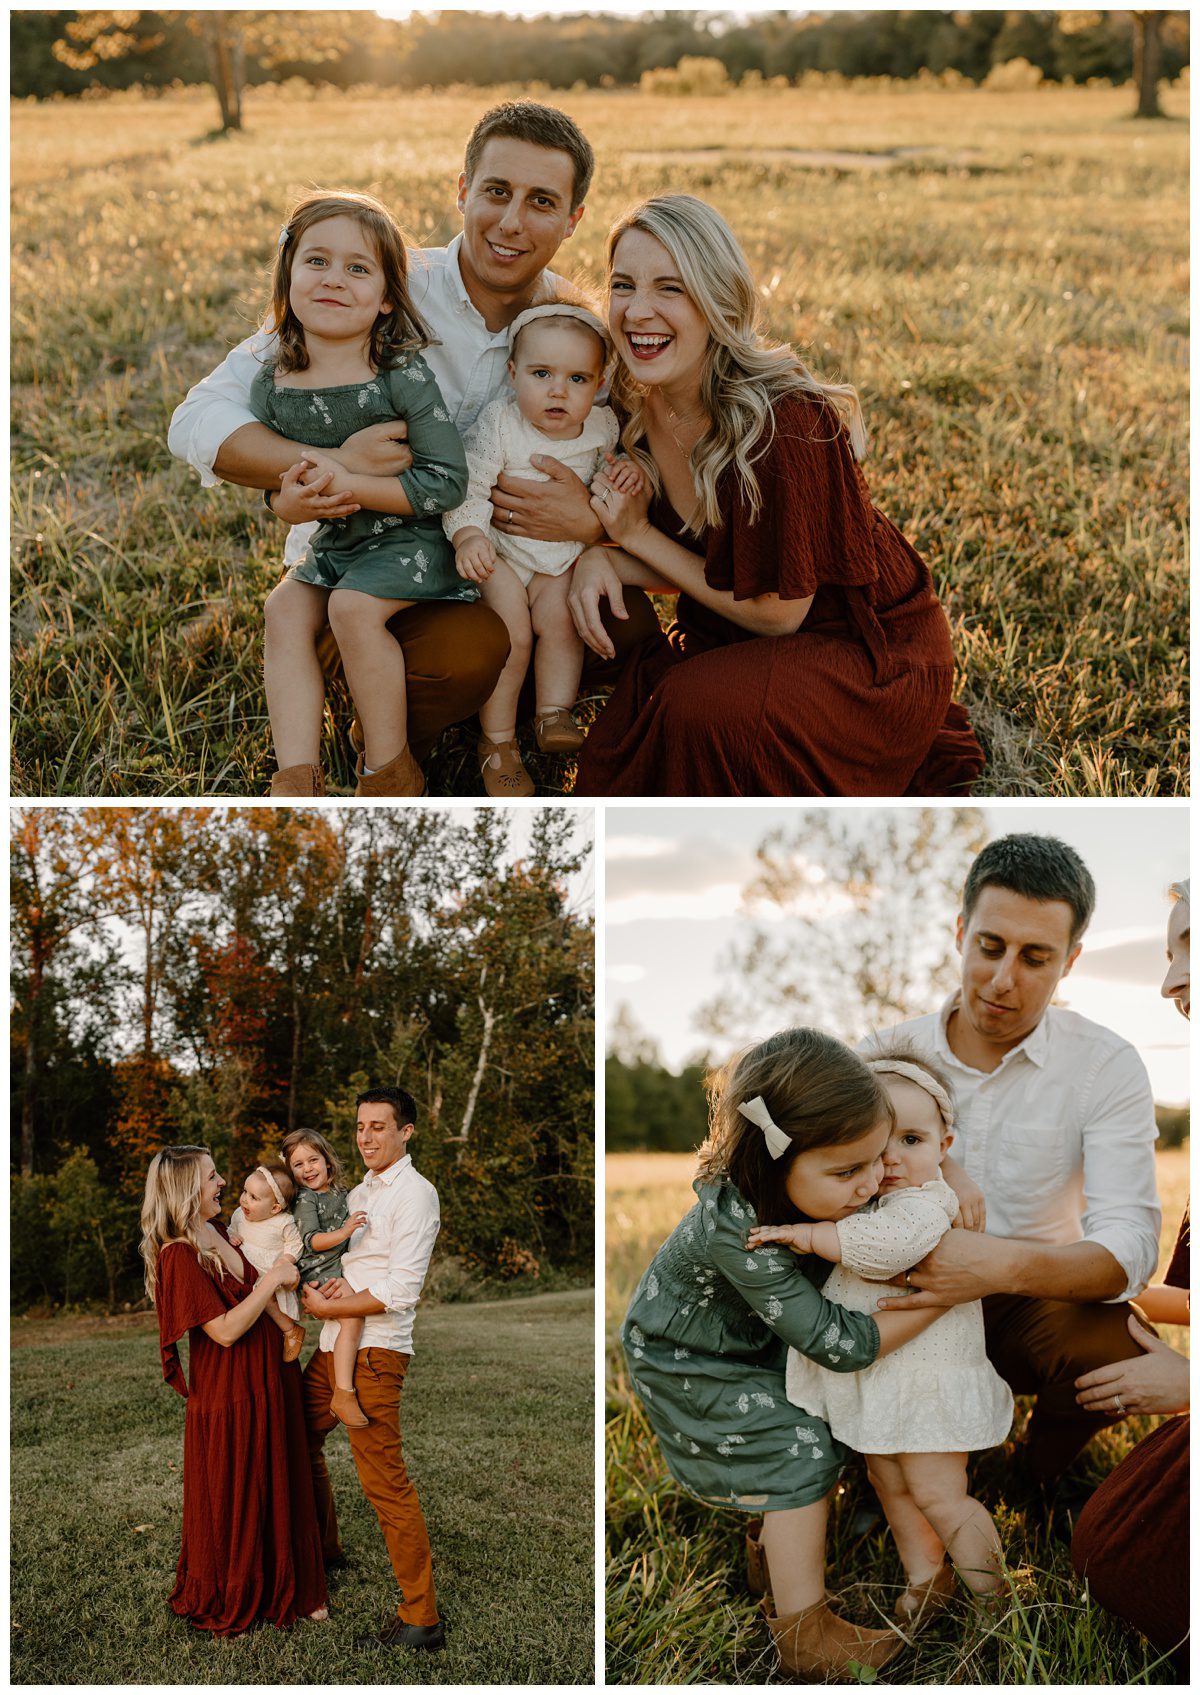 Outdoor fall family photos taken during golden hour by Winston-Salem, NC portrait photographer